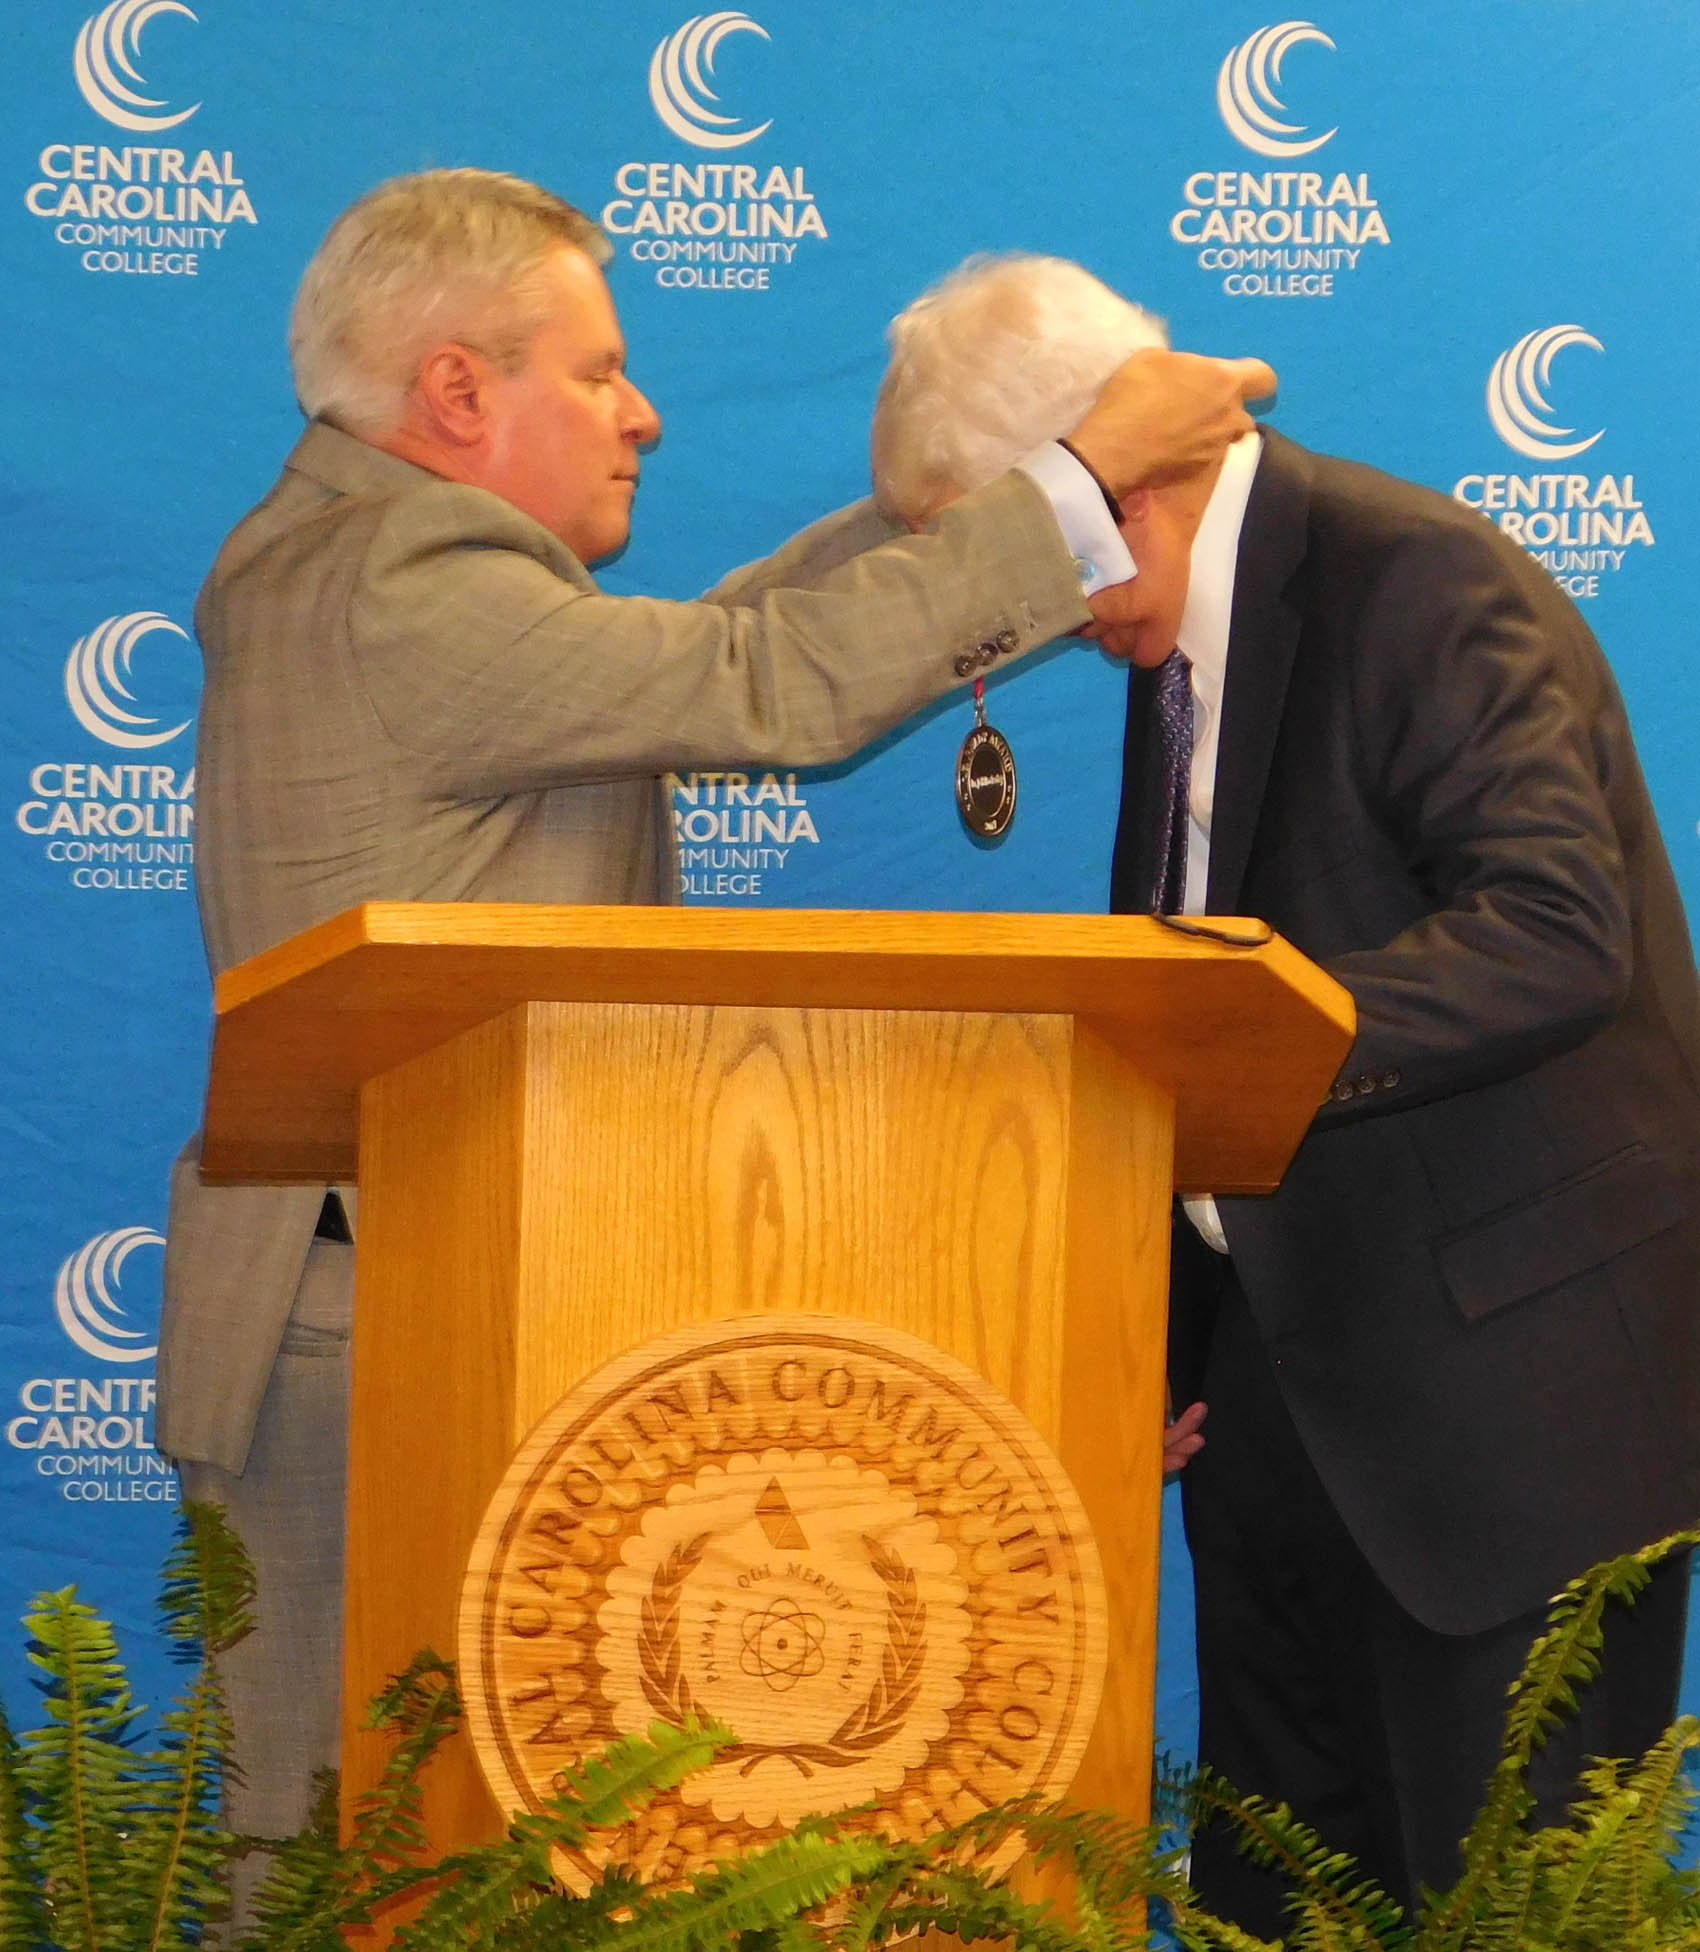 Click to enlarge,  Dr. J.F. Hockaday (right), president of Central Carolina Community College from 1969 to 1983, receives the I.E. Ready Award medal from Dr. James C. Williamson, President of the North Carolina Community College System. The I.E. Ready Award is the highest honor bestowed by the State Board of Community Colleges. 